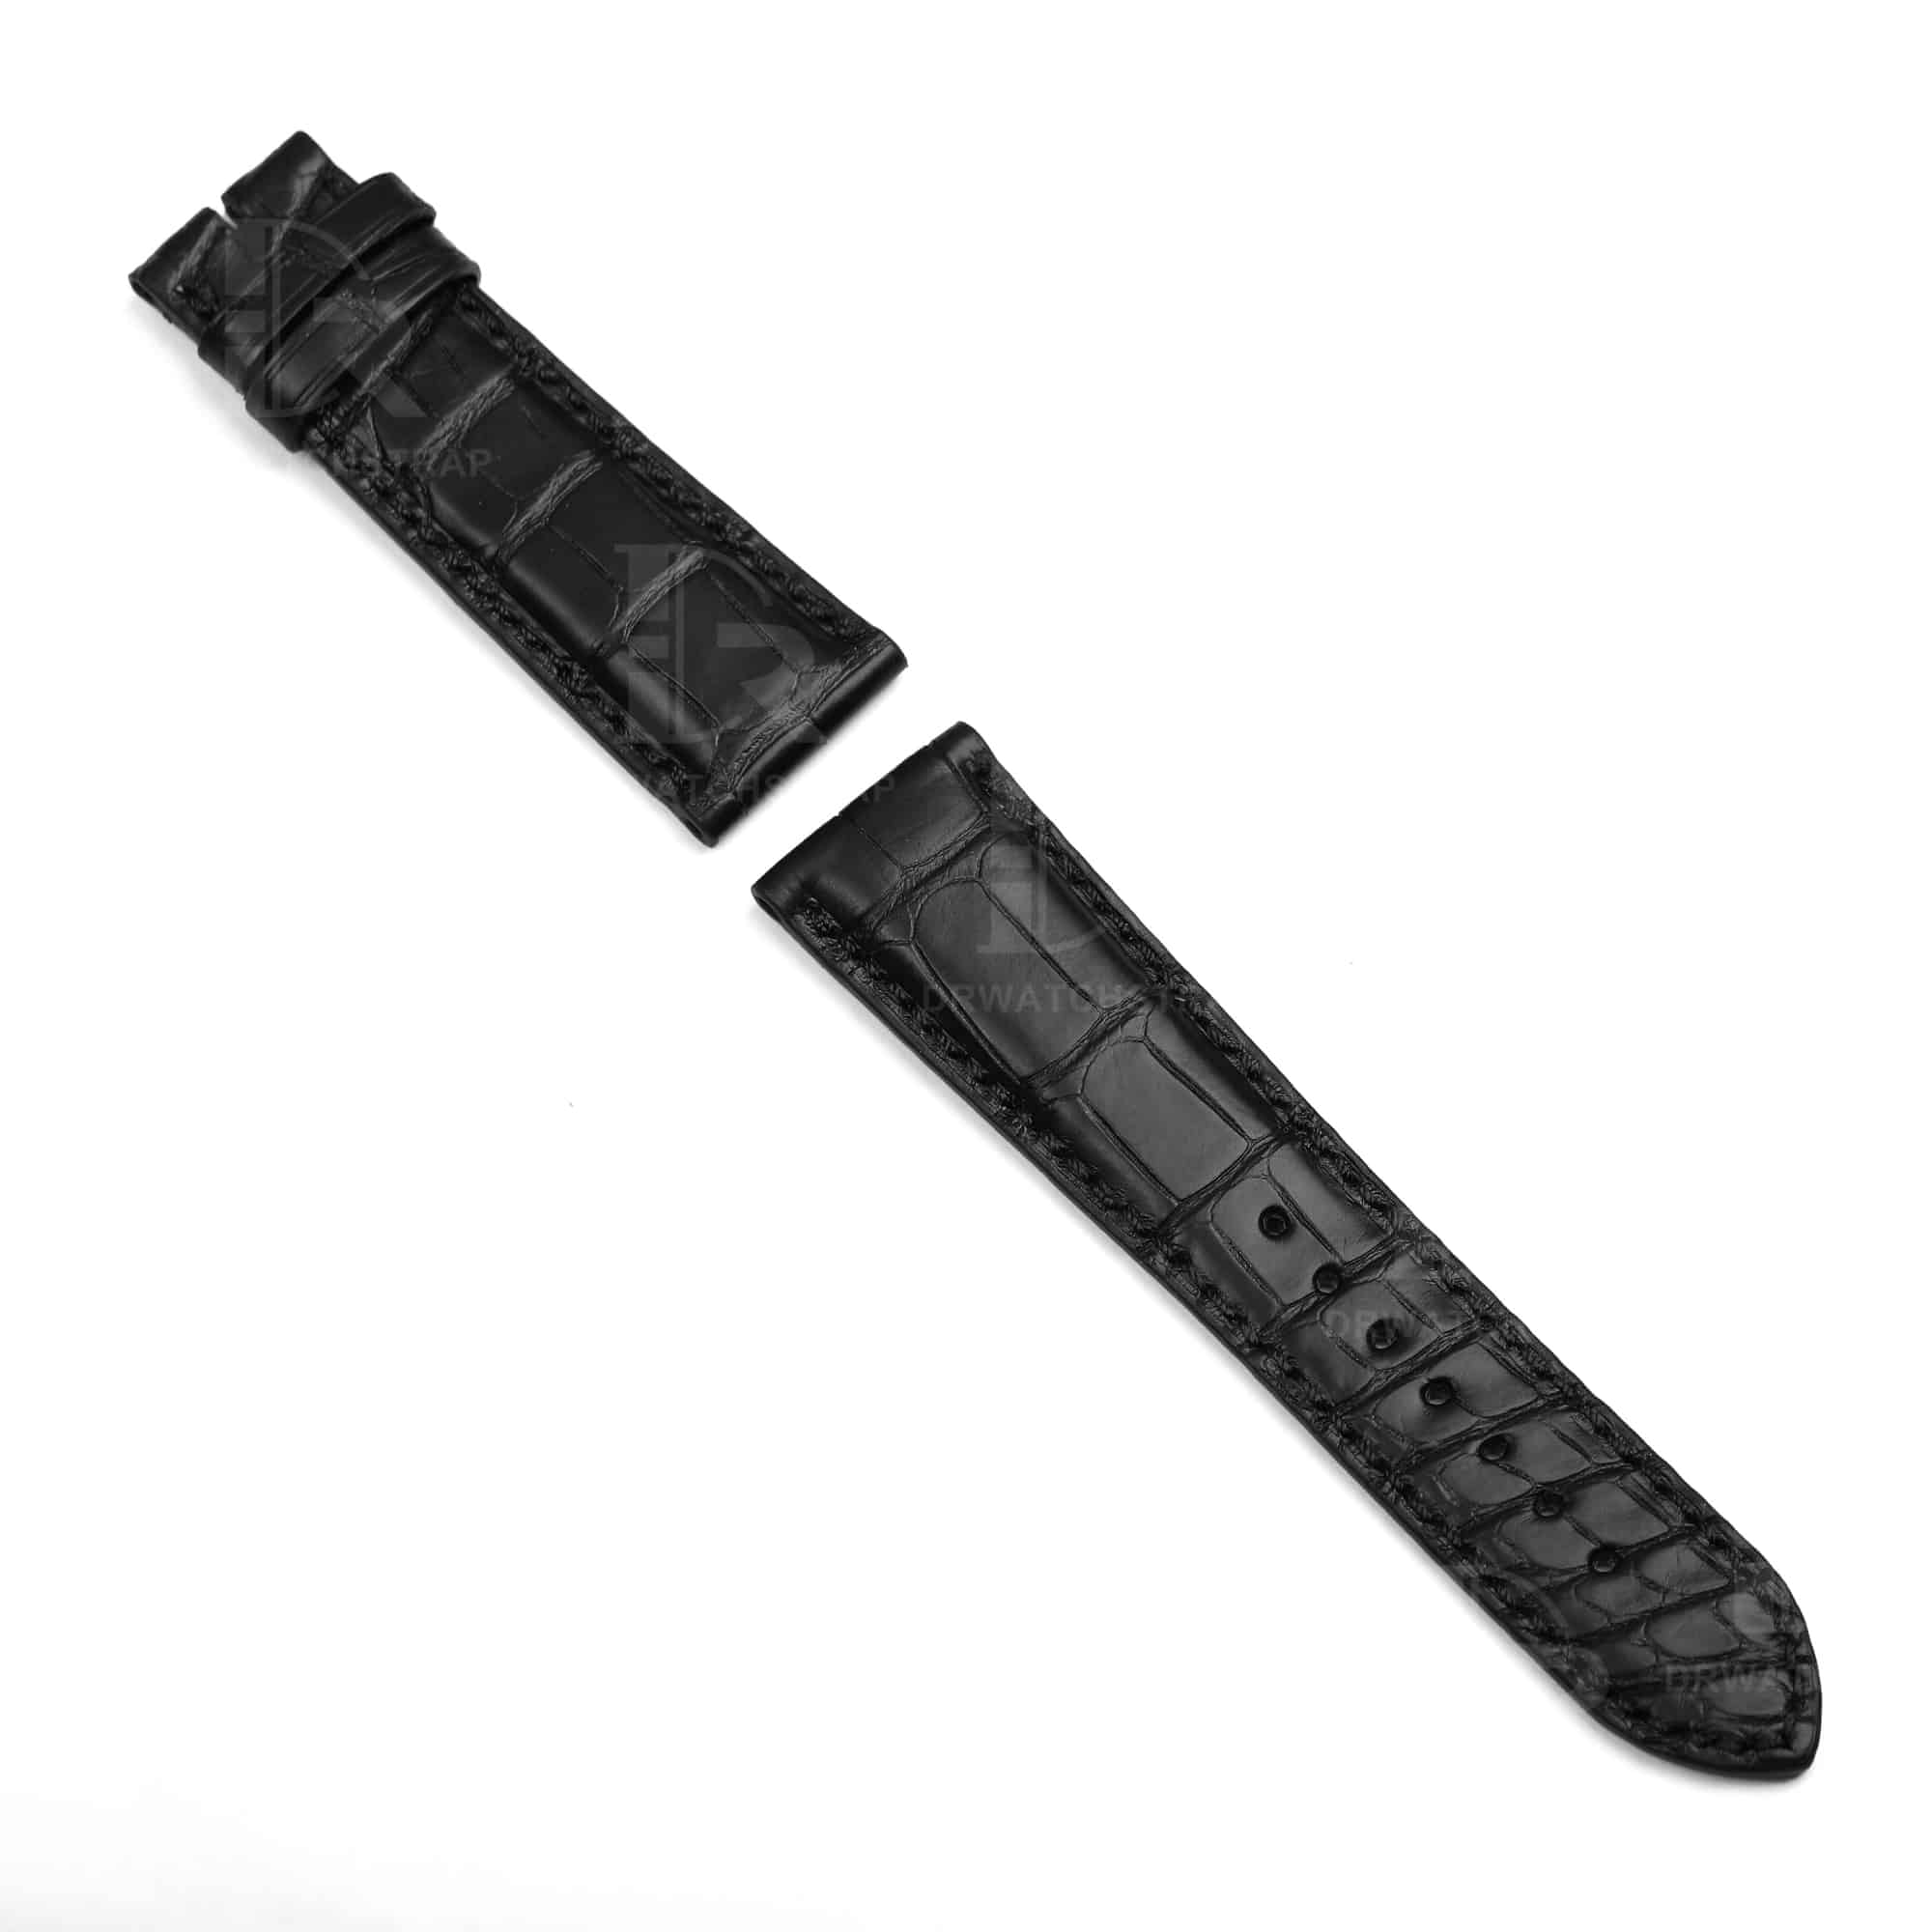 Buy Custom Zenith ELITE ACADEMYEL PRIMERO Black Leather Strap 19mm 20mm 21mm 22mm Replacement for watchbands (1)